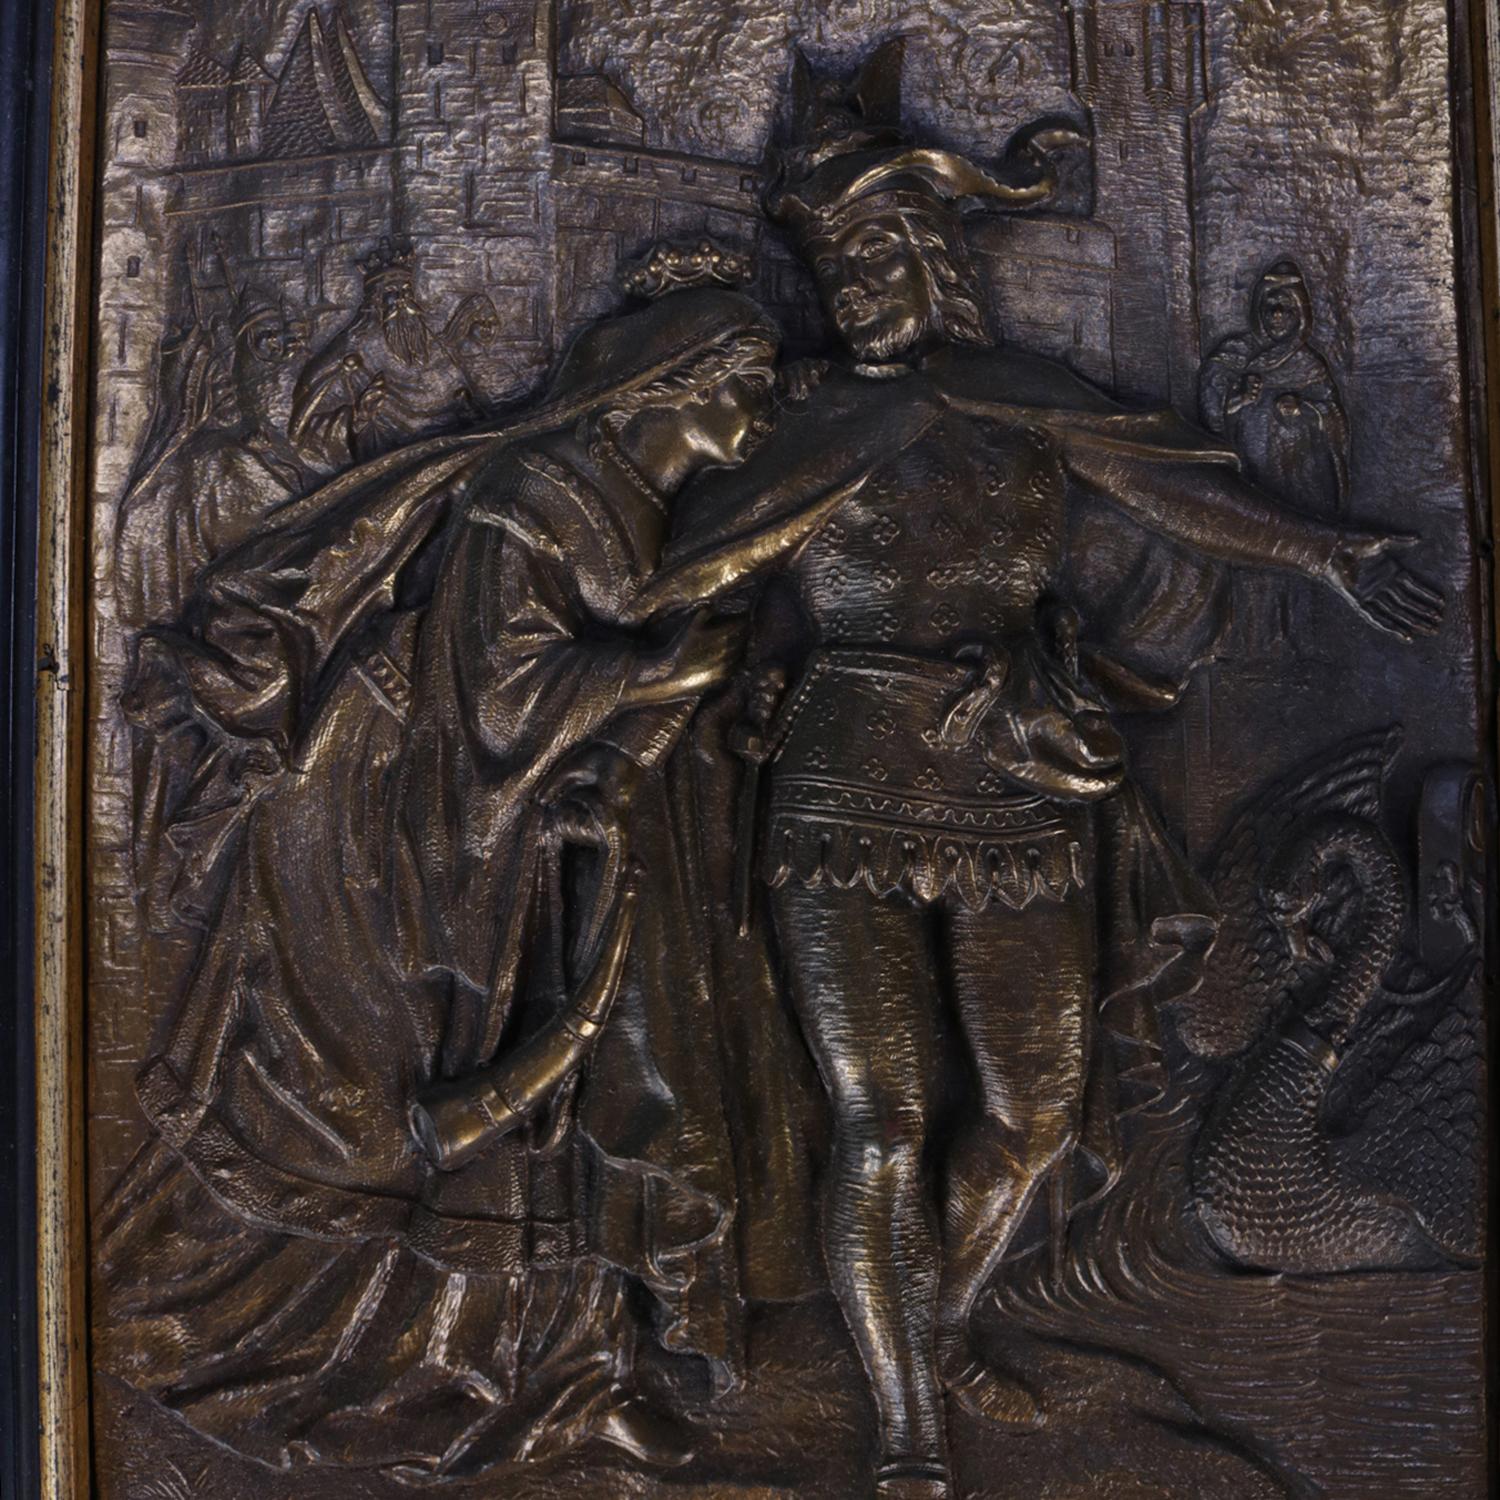 An antique French embossed bronze plaque features courting scene of couple outside the city gates and seated in carved wood frame gilt decorated with English ivy, reminiscent of a Shakespeare scene, circa 1890.

Measures: Frame 13.25